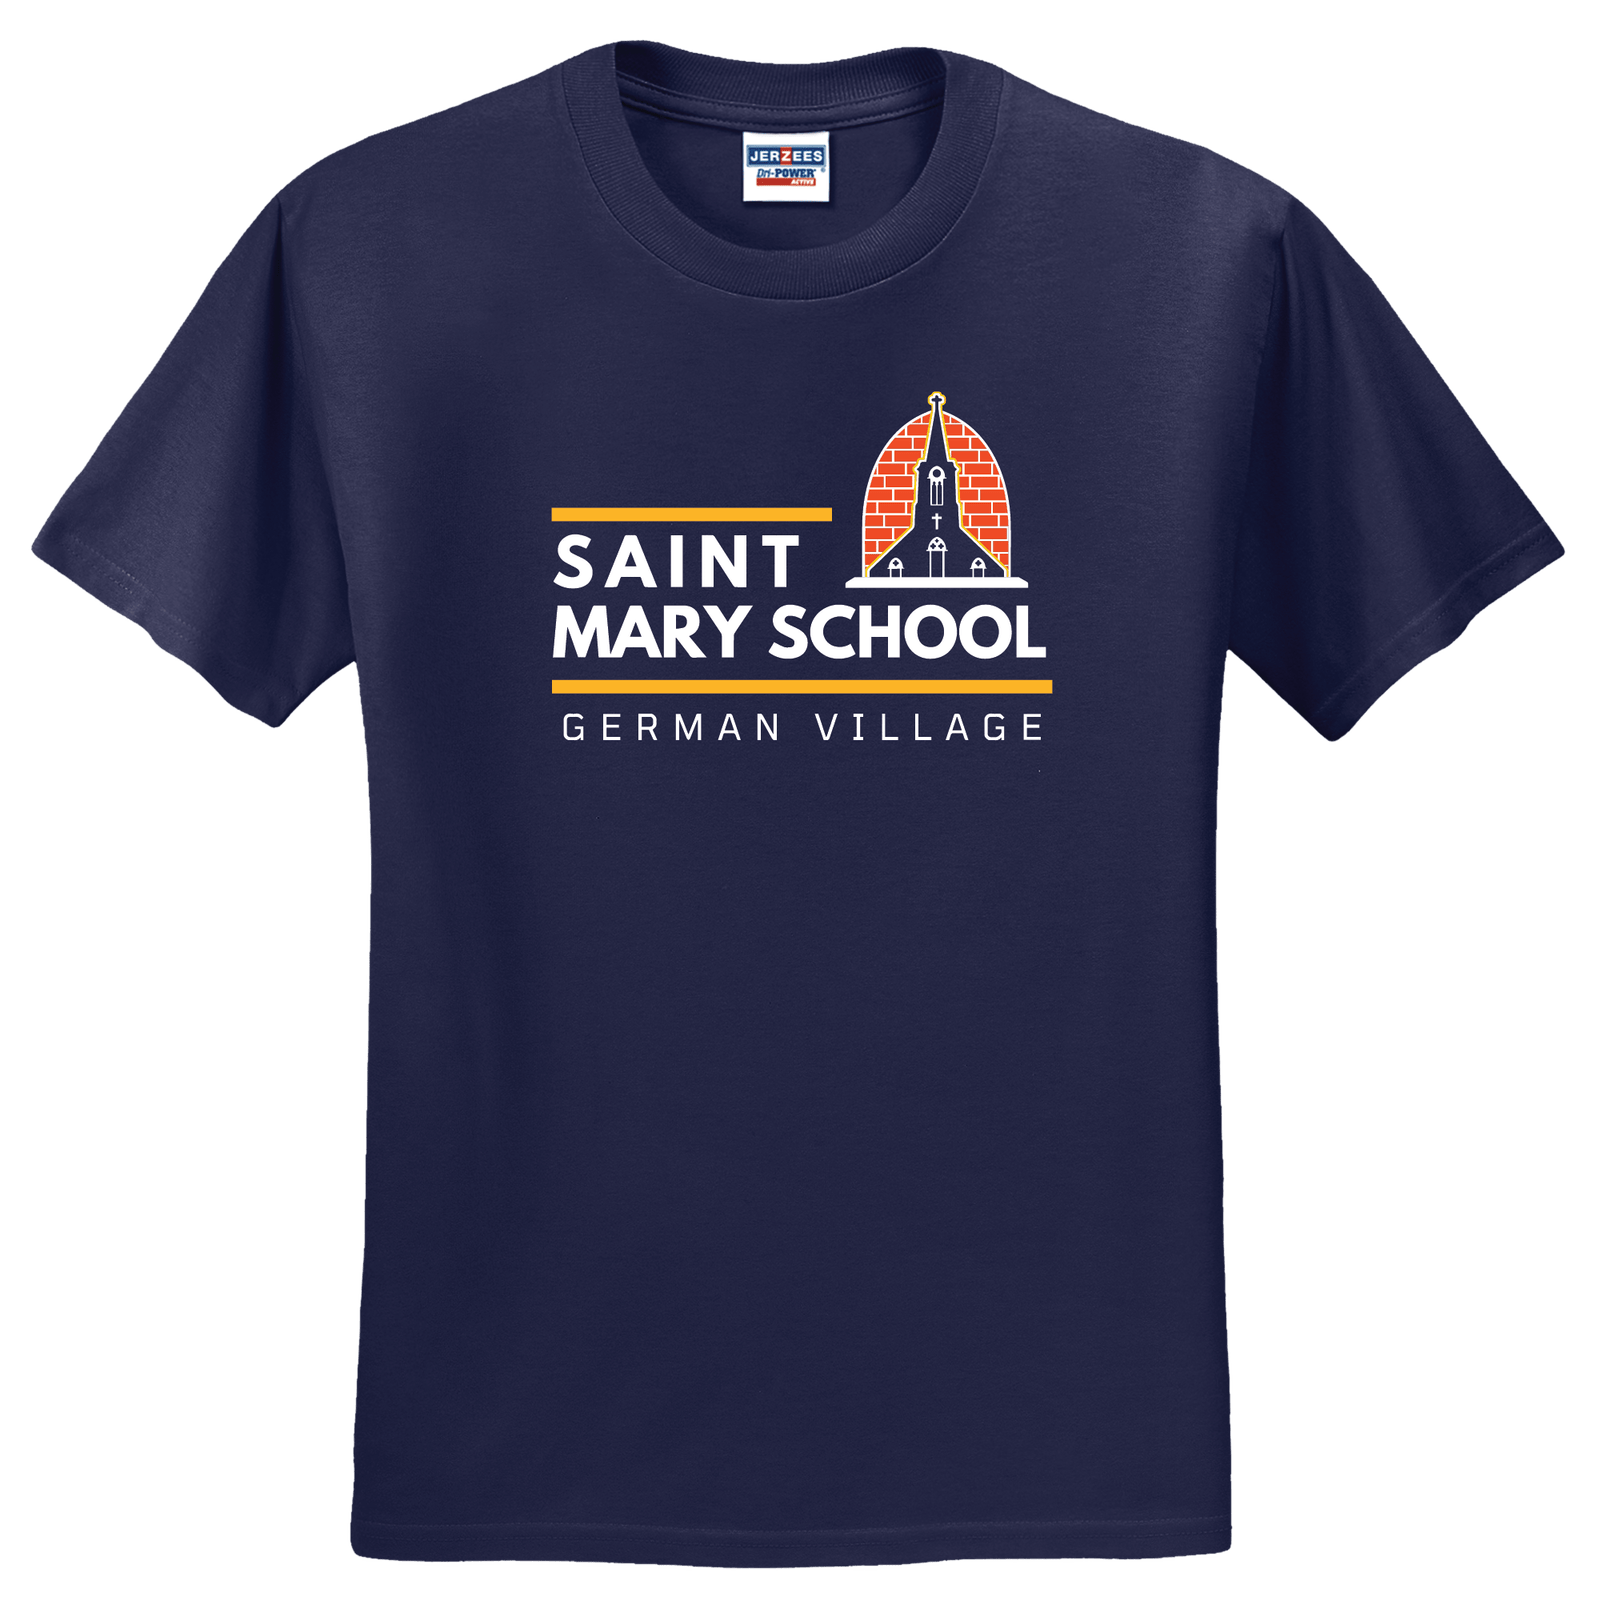 Saint Mary - Rams - T-Shirt - Navy Blue - Puzzle Design and Craft